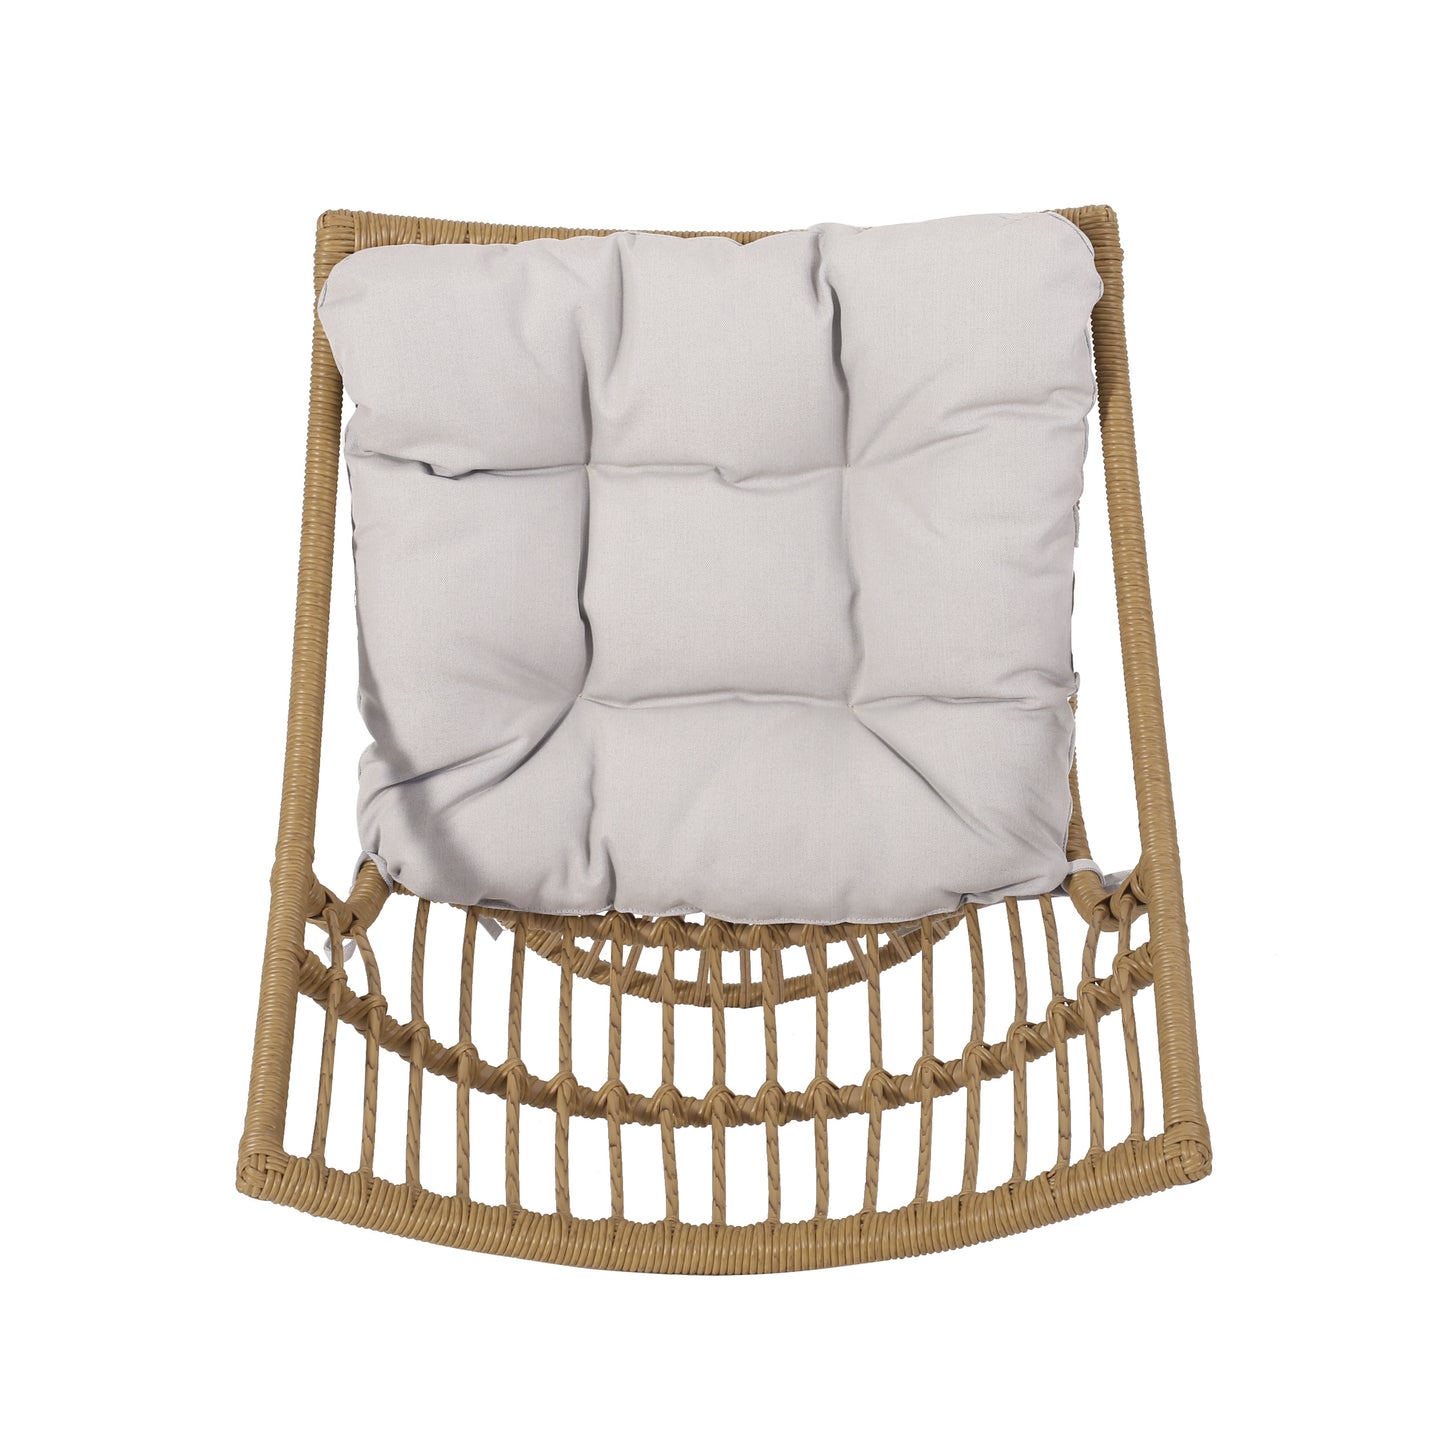 Apulia Outdoor Wicker 2 Seater Chat Set with Cushion, Light Brown and Beige